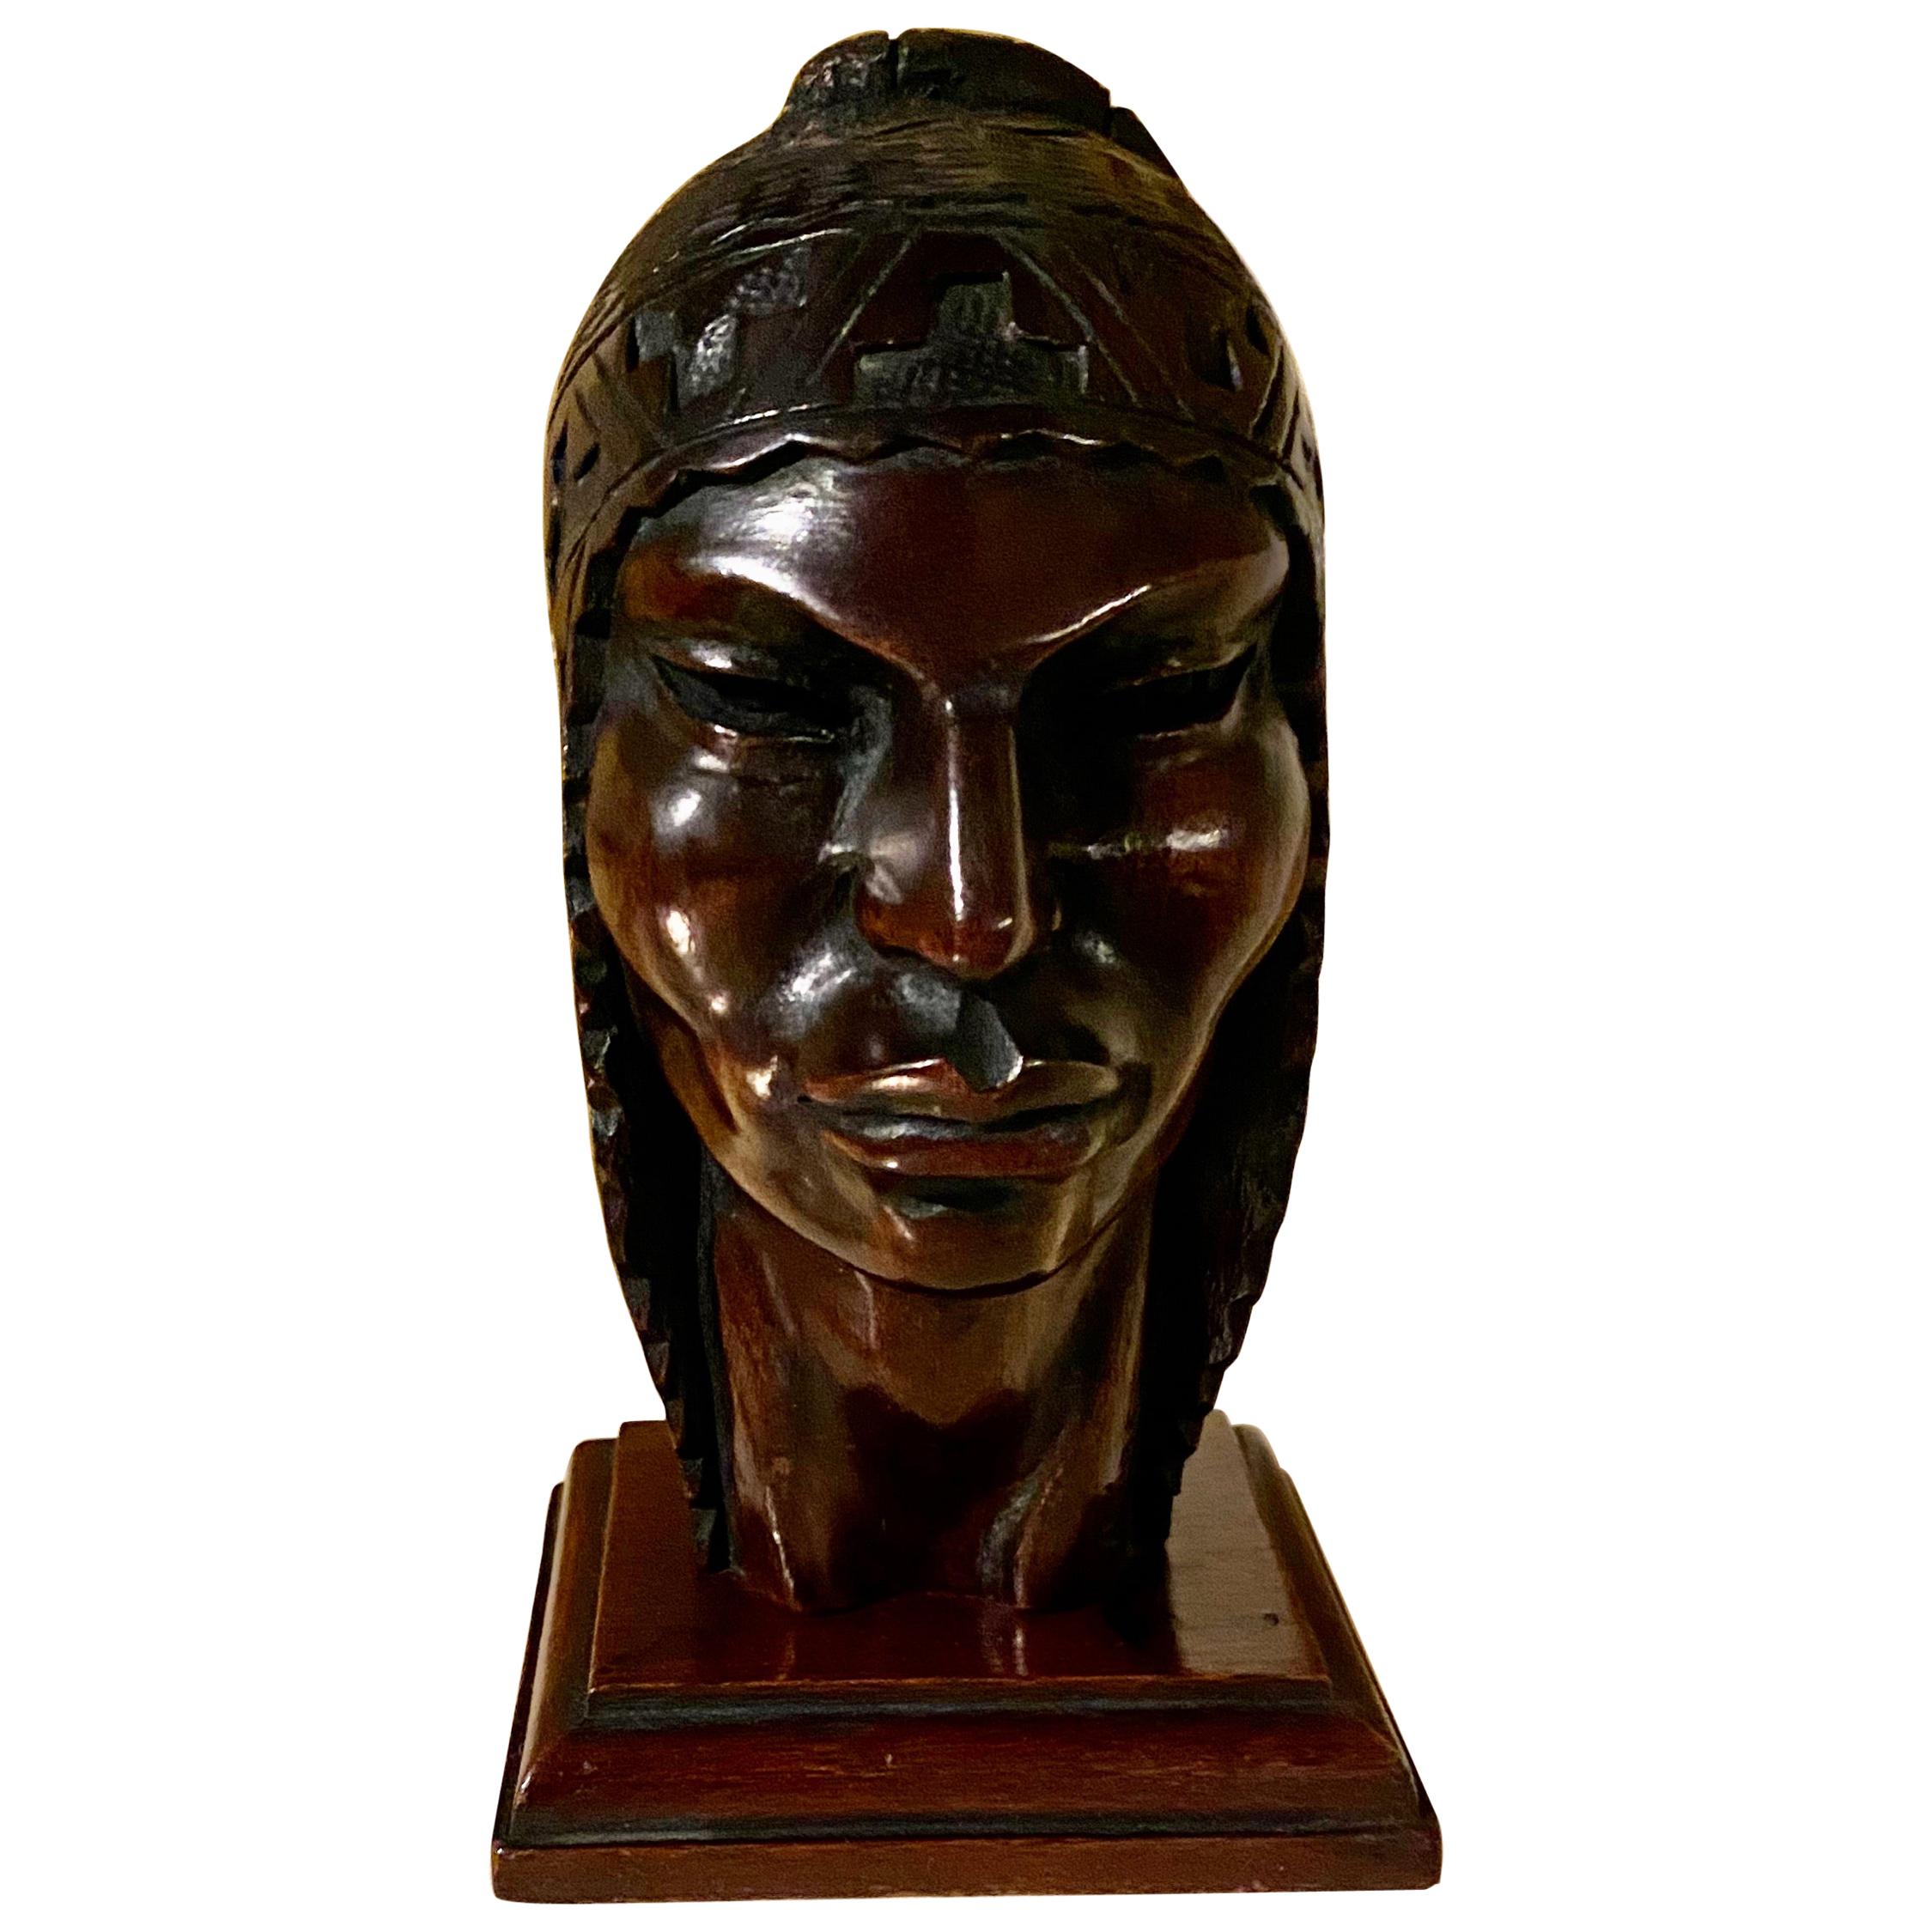 Exotic Indian Art Deco Sculpted Head in Wood by Arias